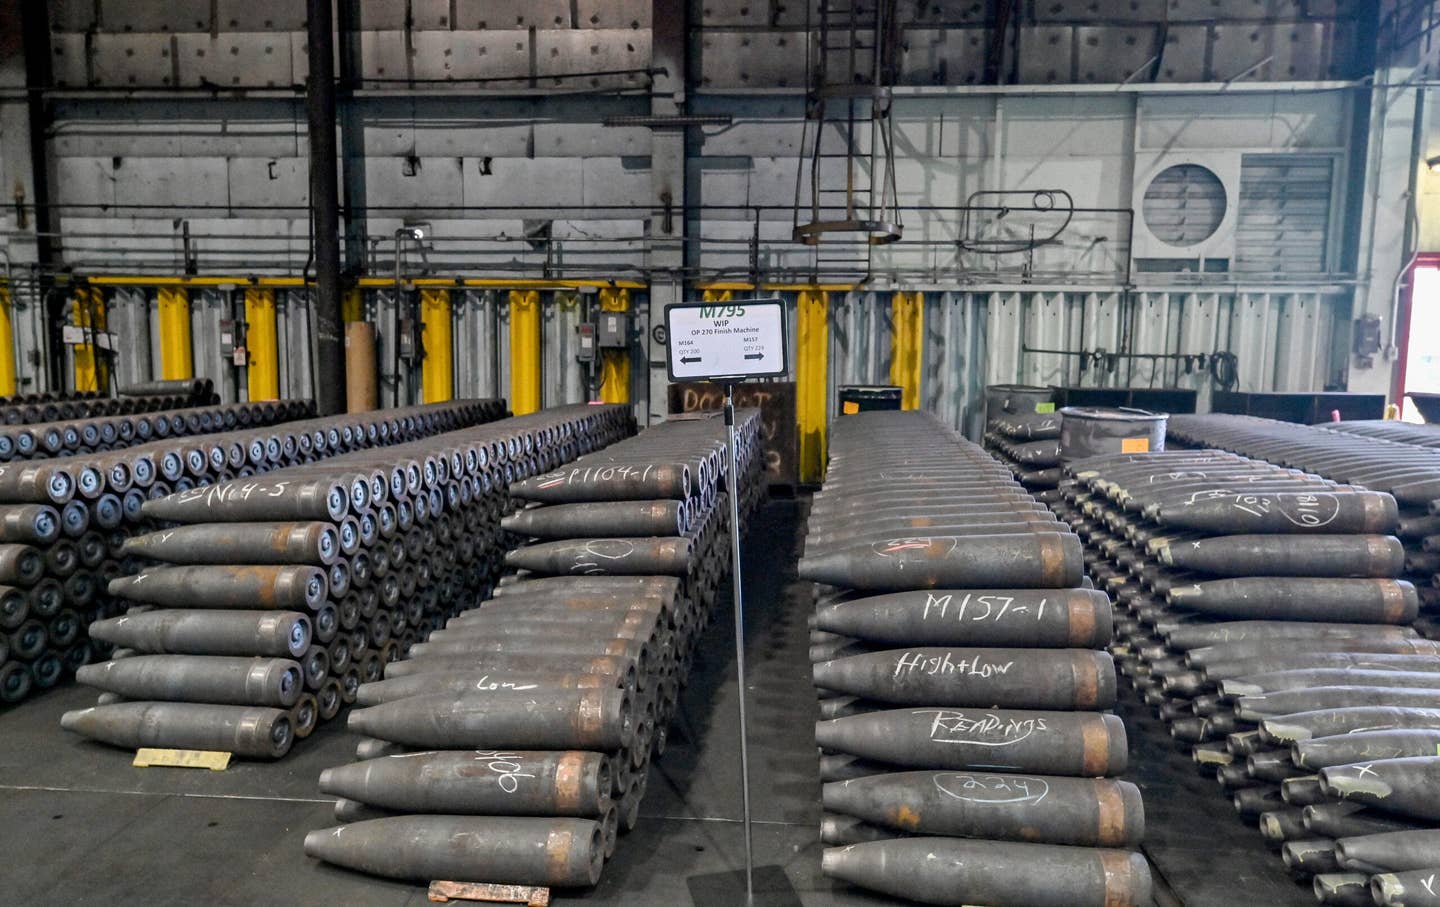 Rows of incomplete shells wait for the next step in production. The Scranton Army Ammunition Plant held a media day to show what they make. The plant makes a 155mm artillery shell. (Photo by Aimee Dilger/SOPA Images/LightRocket via Getty Images)